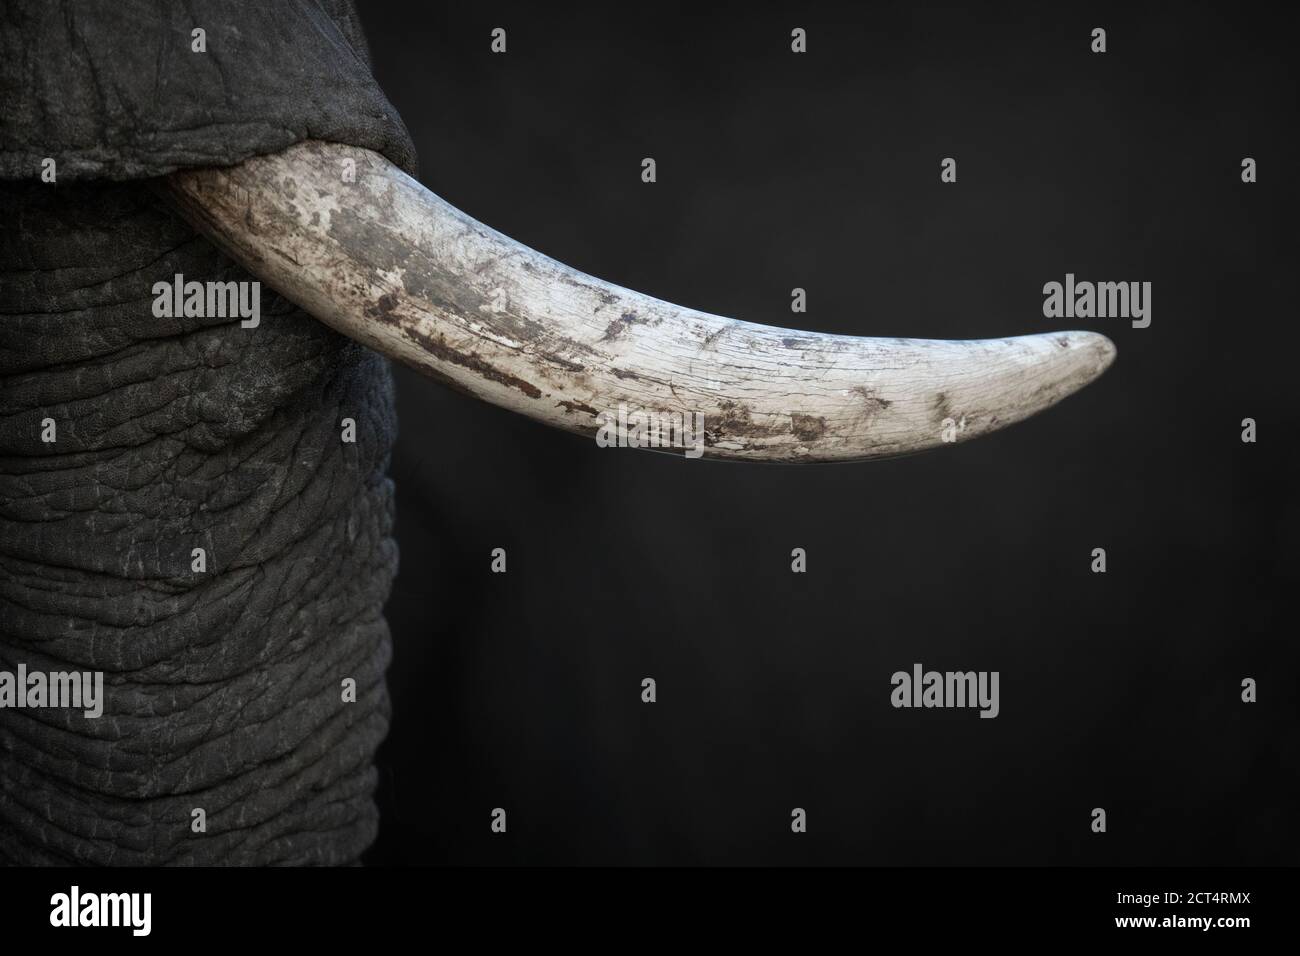 Close up details of an elephants tusk. Stock Photo